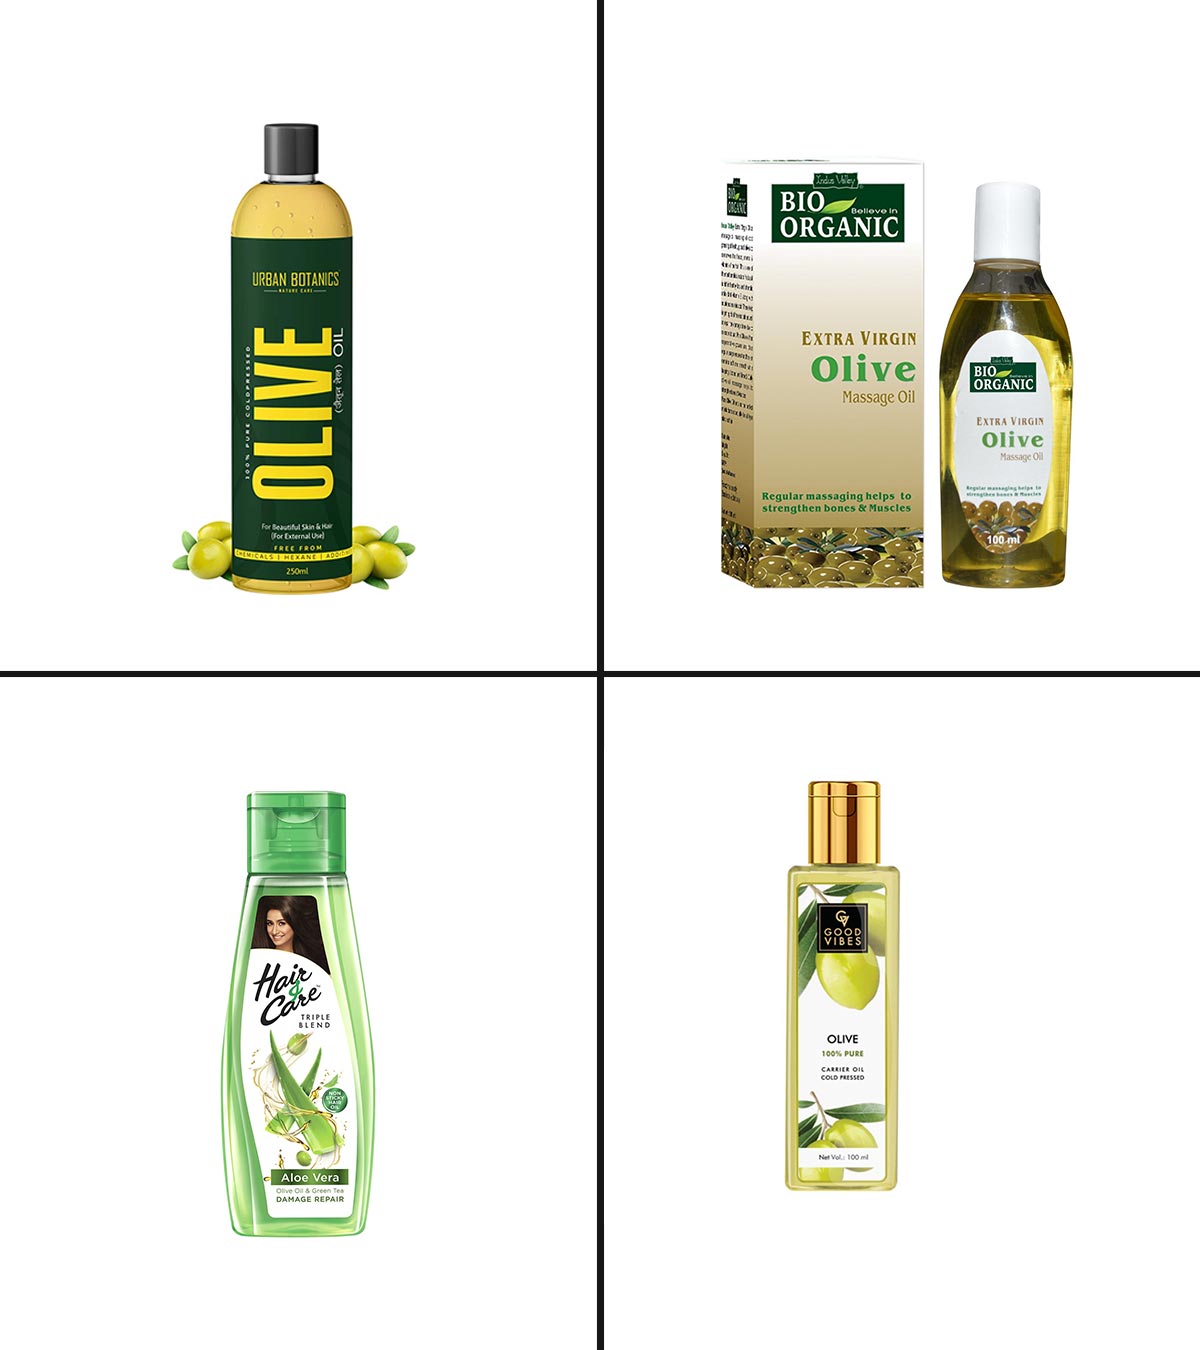 Trust Olive Oil To Benefit Your Hair In Ways You Didn't Know | Femina.in